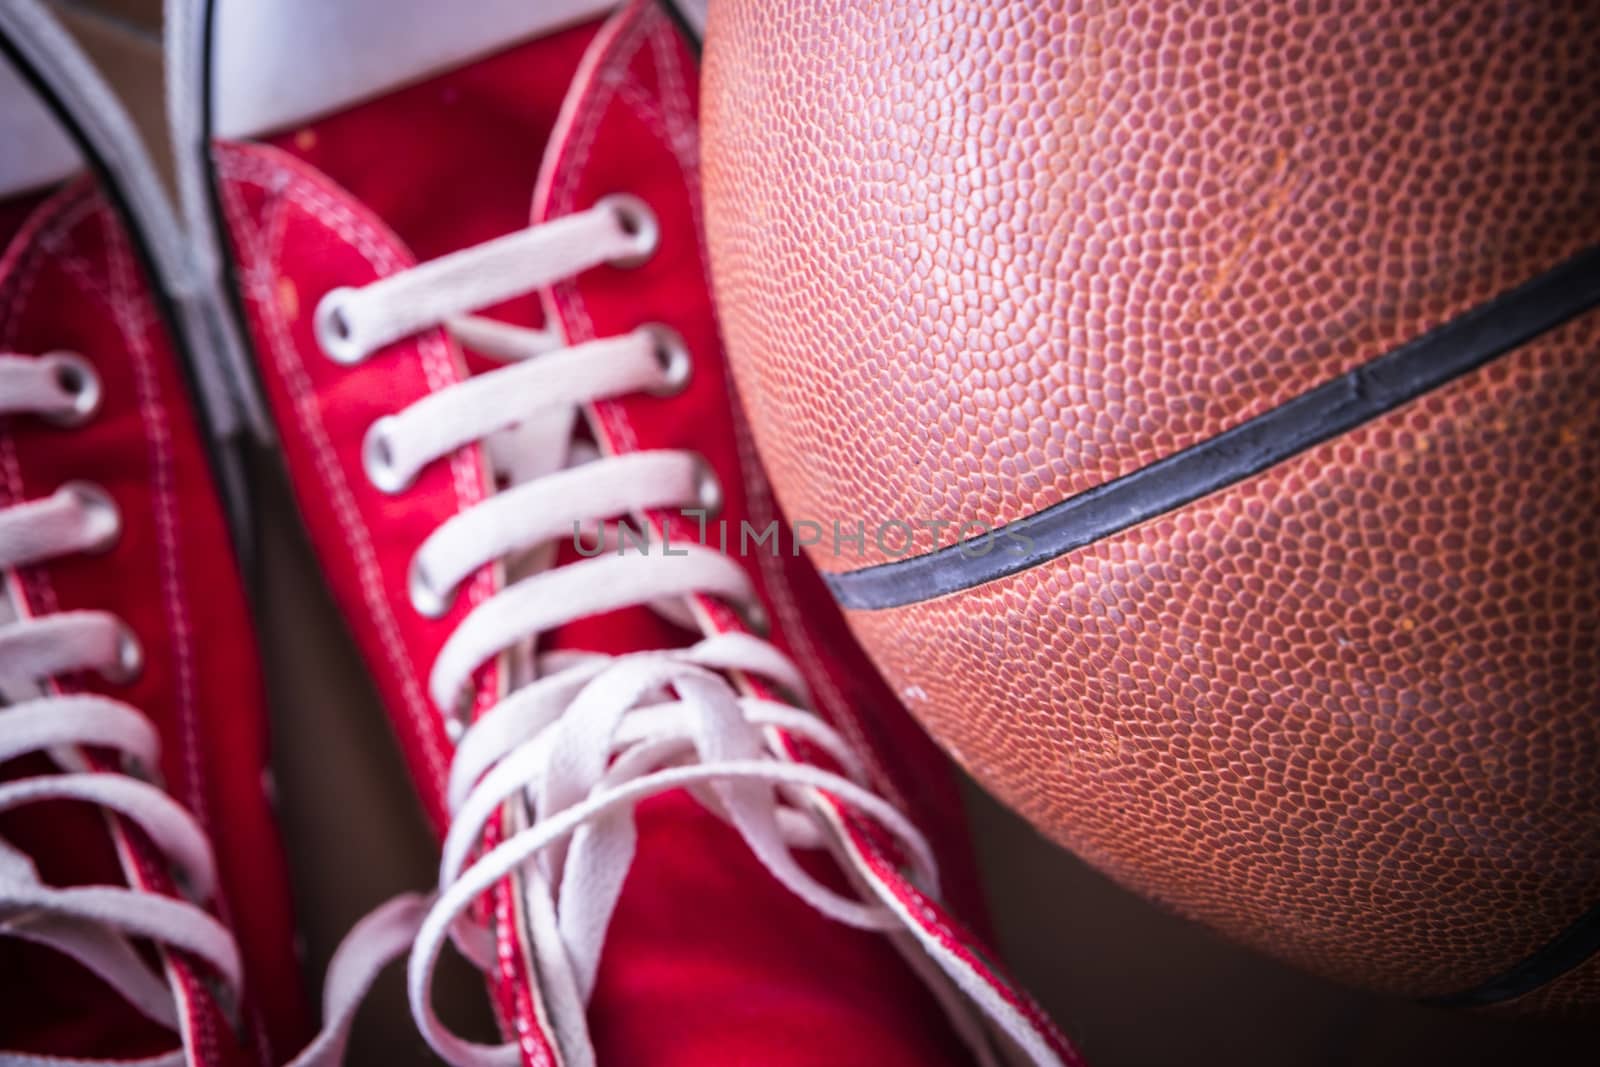 Sport sneakers and basket ball by digicomphoto